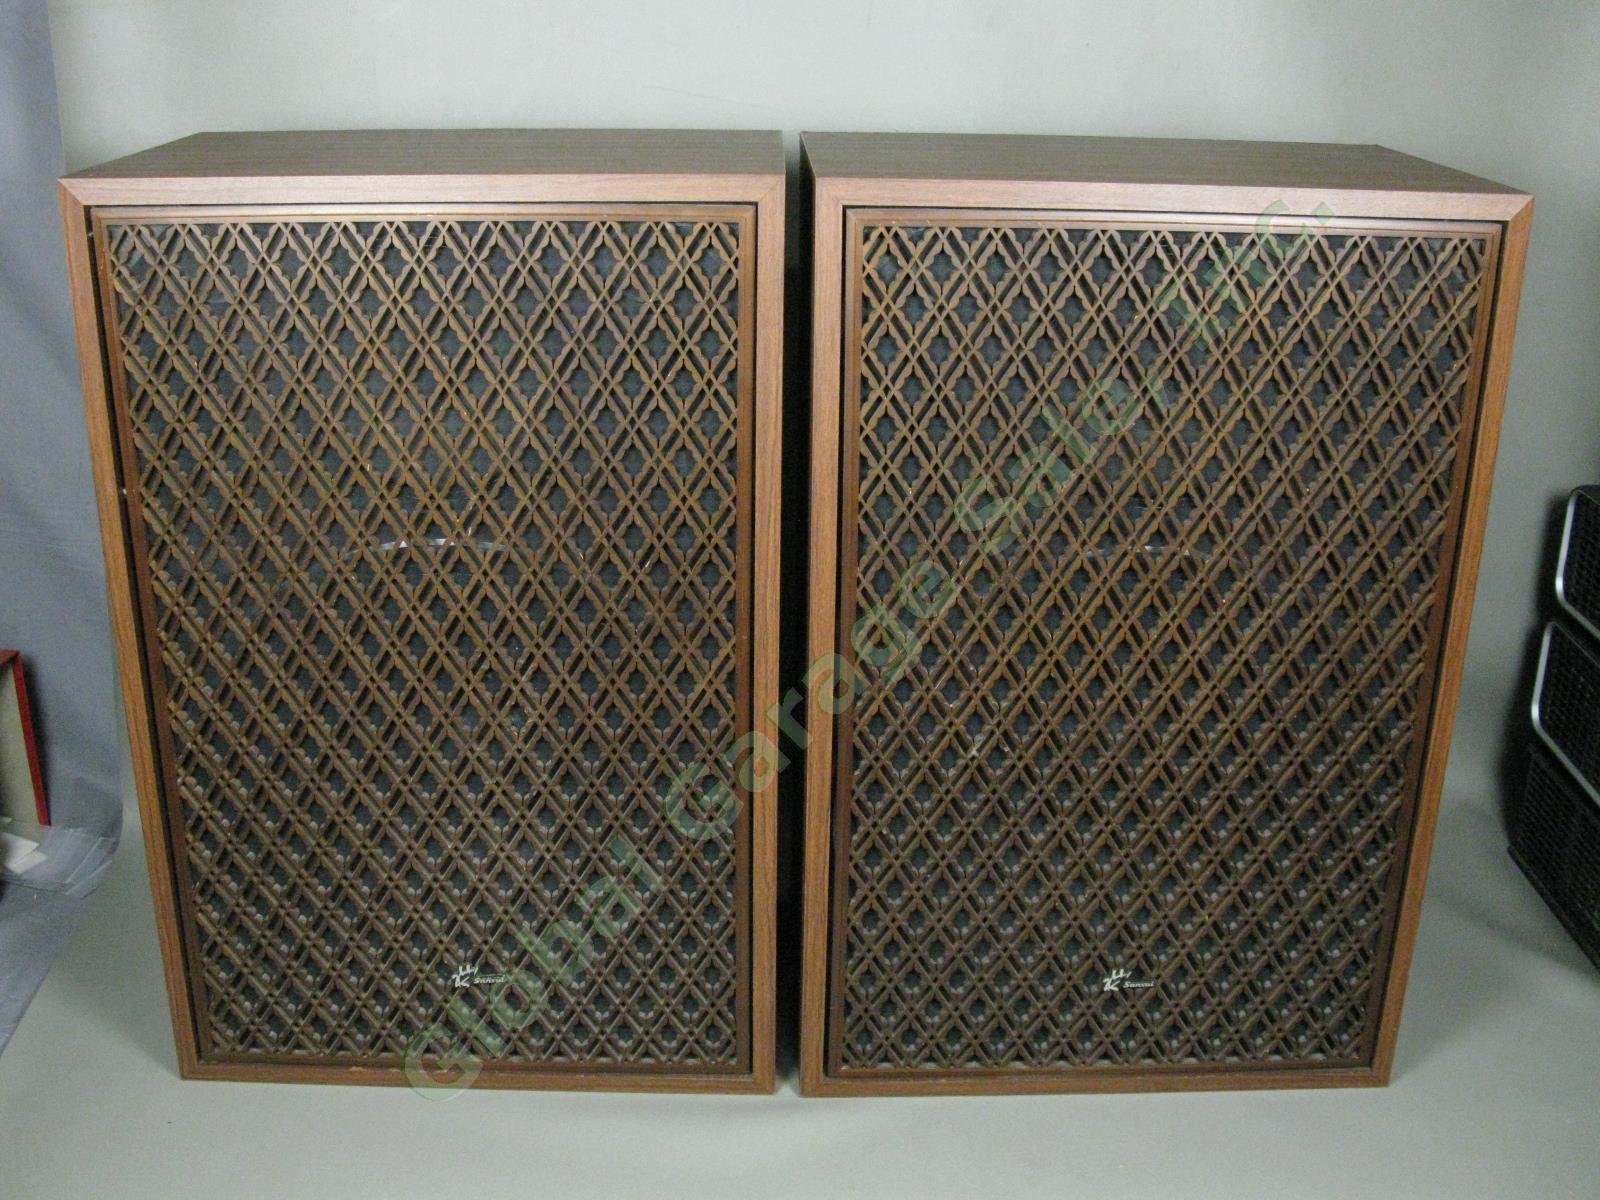 Rare Vintage 1970s Sansui SP5000A Stereo Speakers 130W 16" Woofers One Owner!